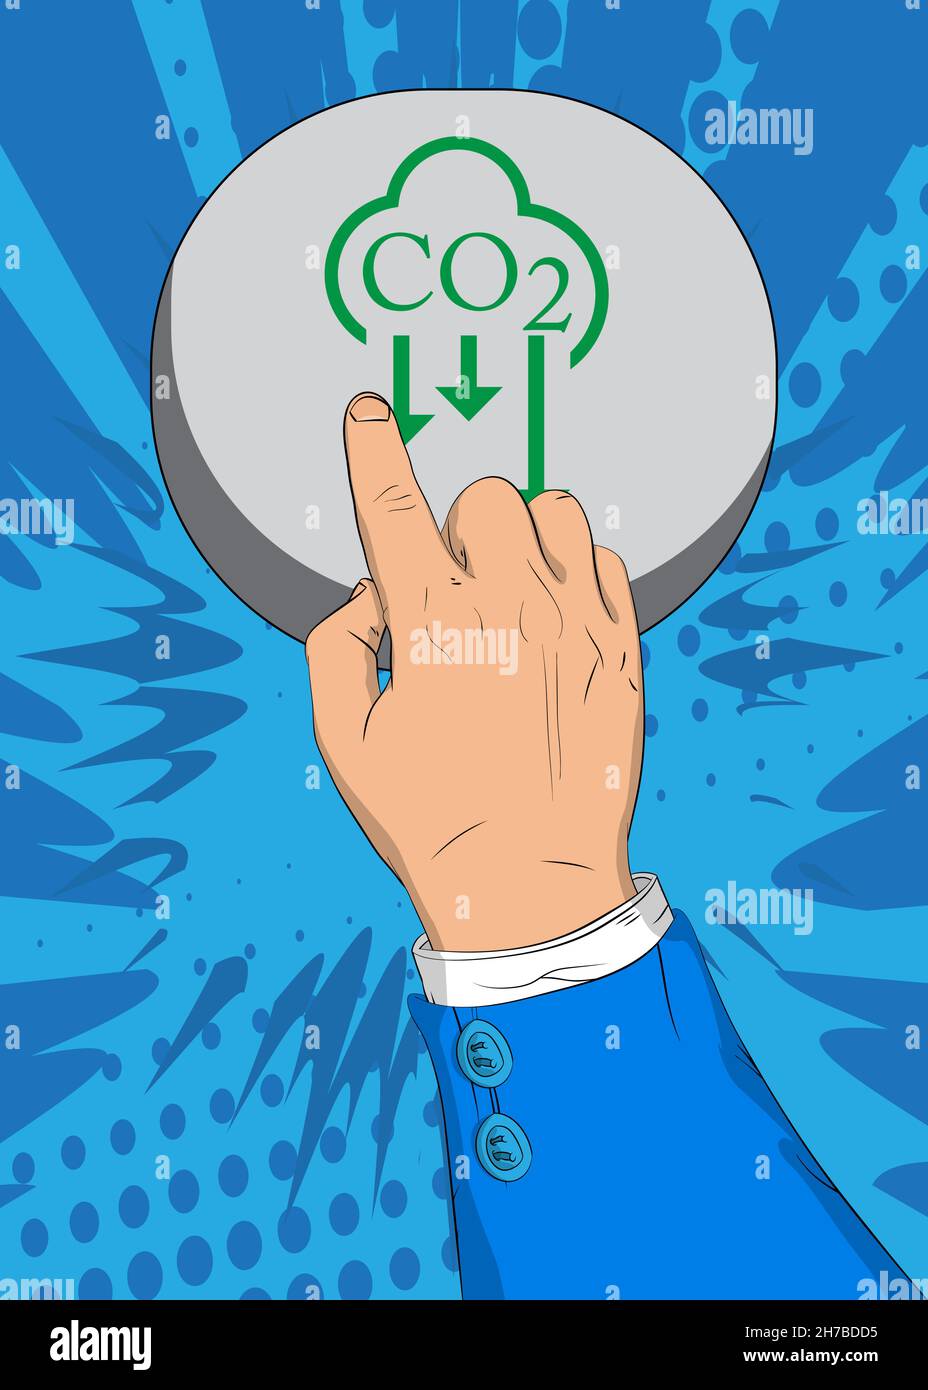 Businessman pushing CO2 emission sign, Carbon dioxide icon button with his index finger. Comic book style concept. Stock Vector